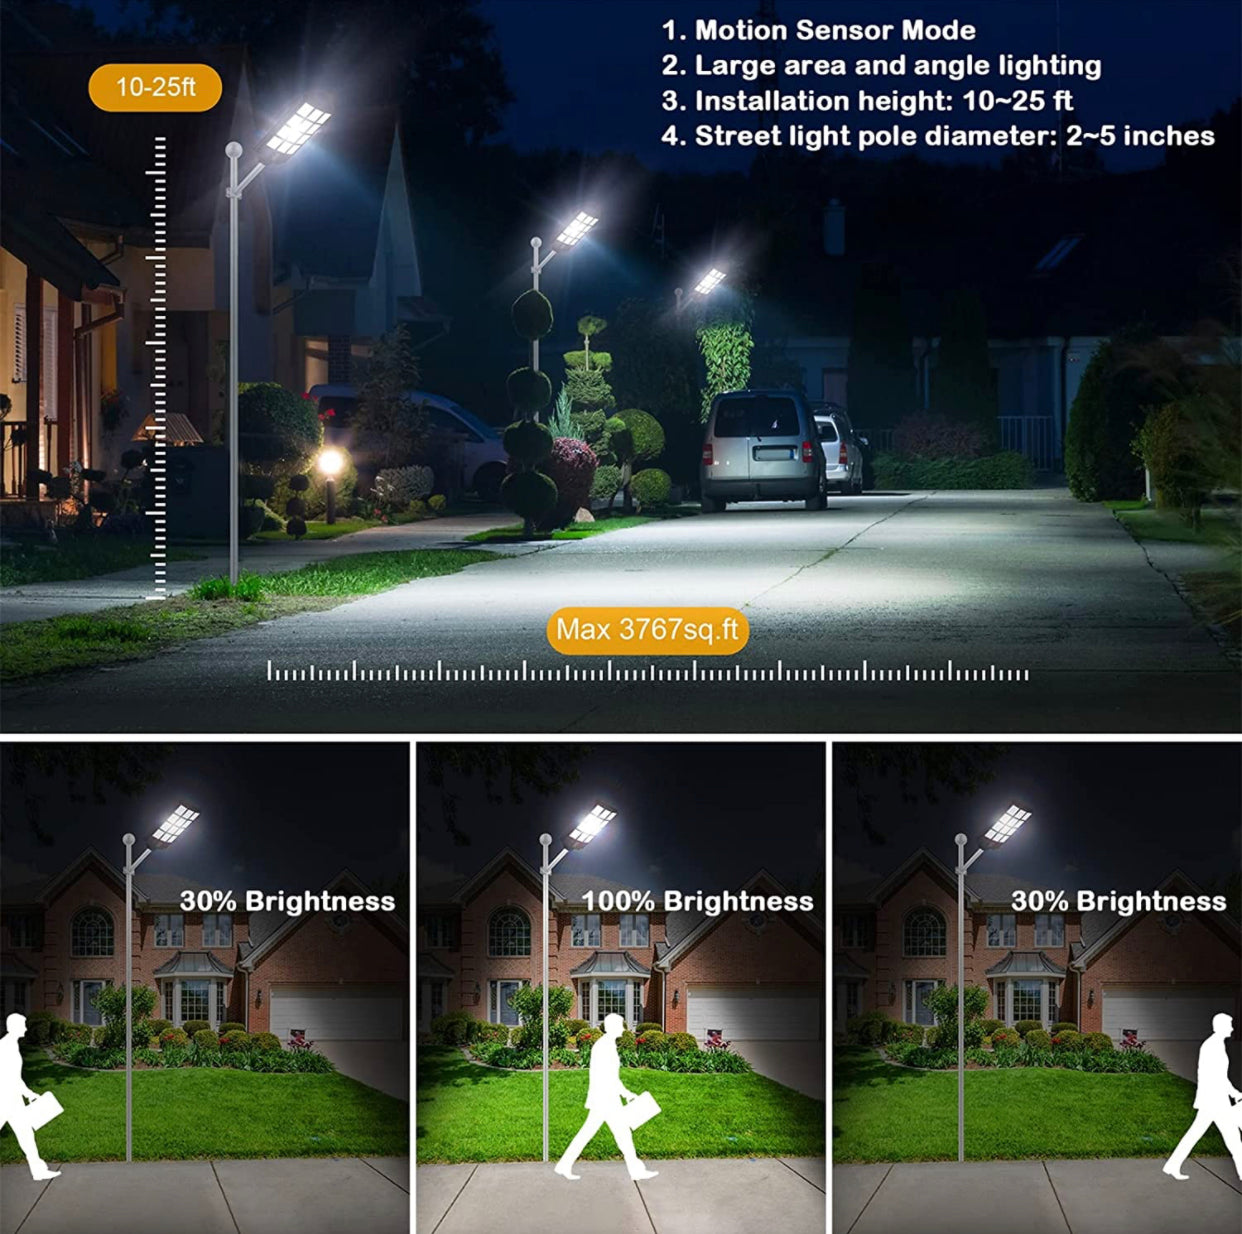 1200W Commercial Solar Street Light , 100000LM Parking Lot Light Commercial Dusk to Dawn With Remote